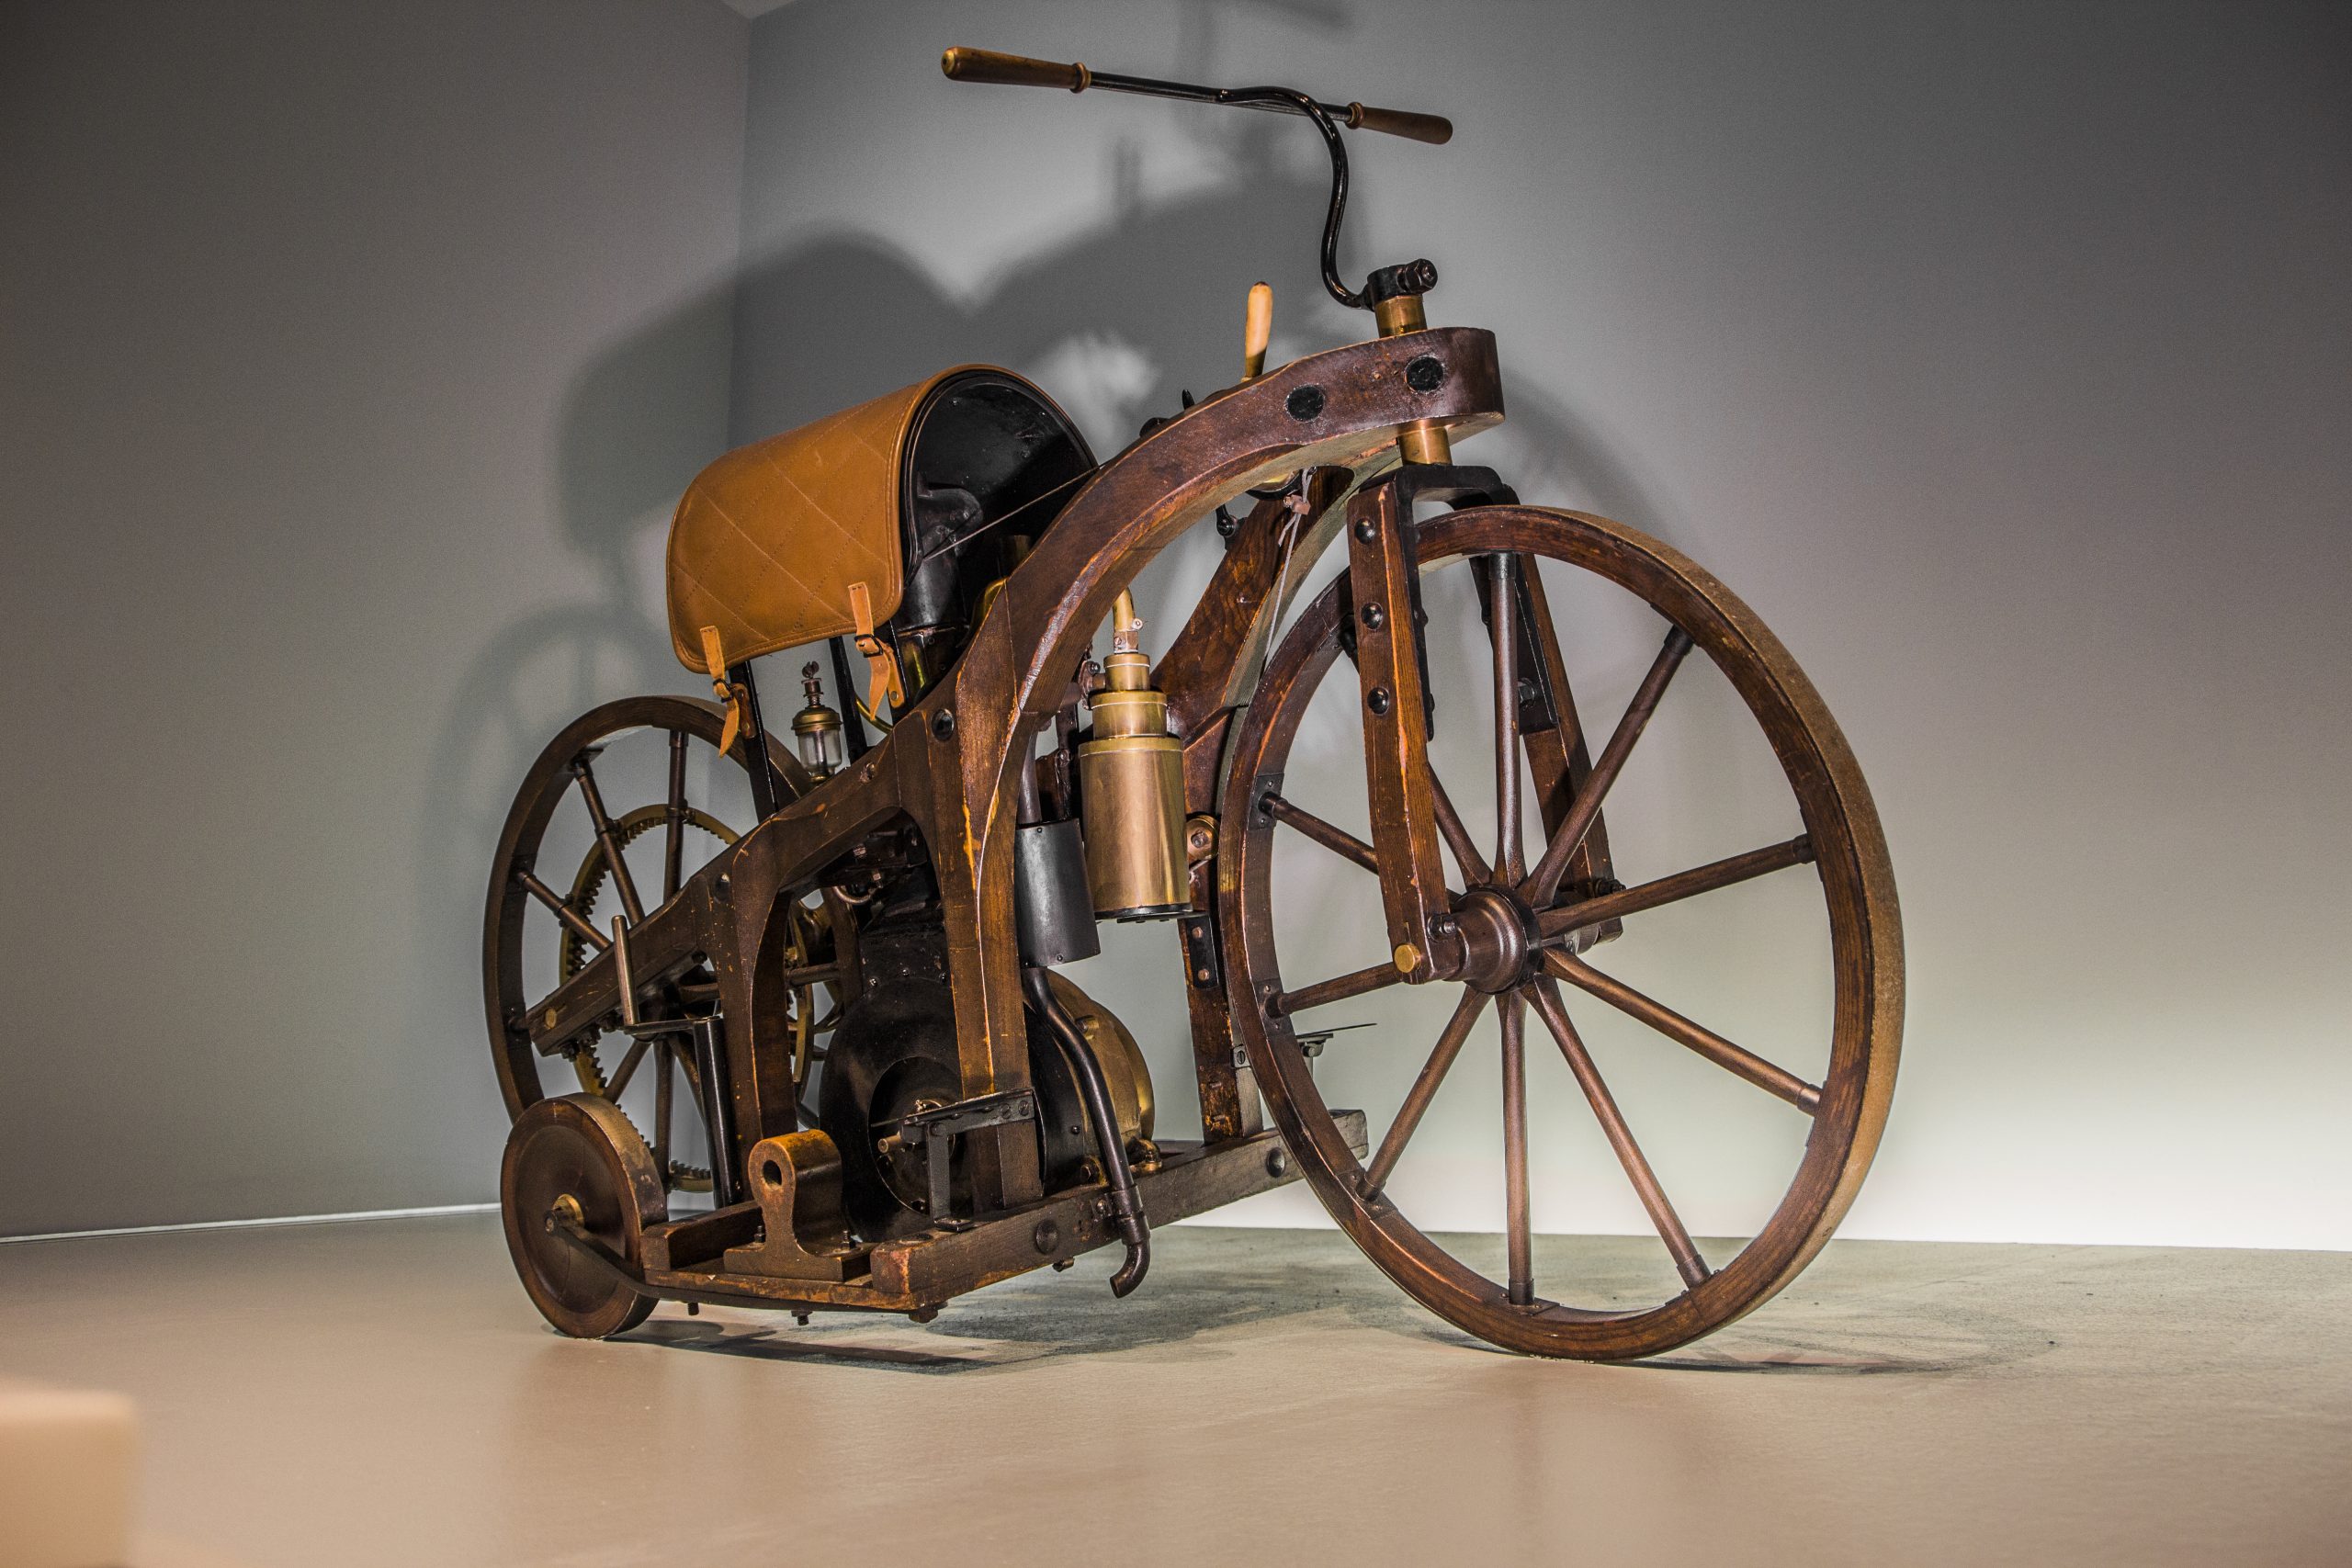 November 10, 1885 - The first motorcycle ride - This Day in Automotive History